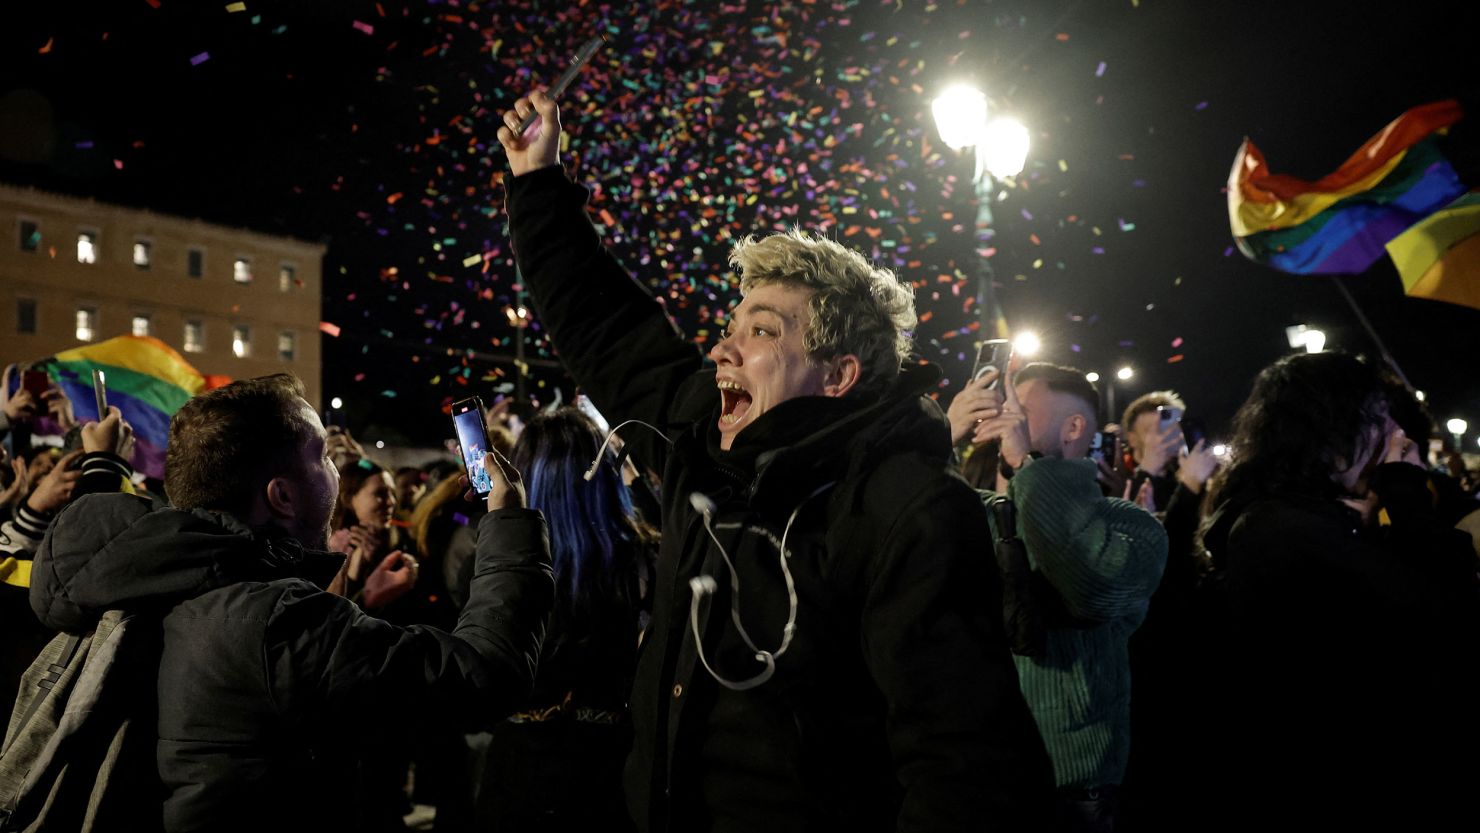 Members of the LGBTQ+ community and supporters celebrate in front of the Greek parliament, after the vote in favor of a bill that approved allowing same-sex civil marriages, in Athens on February 15.